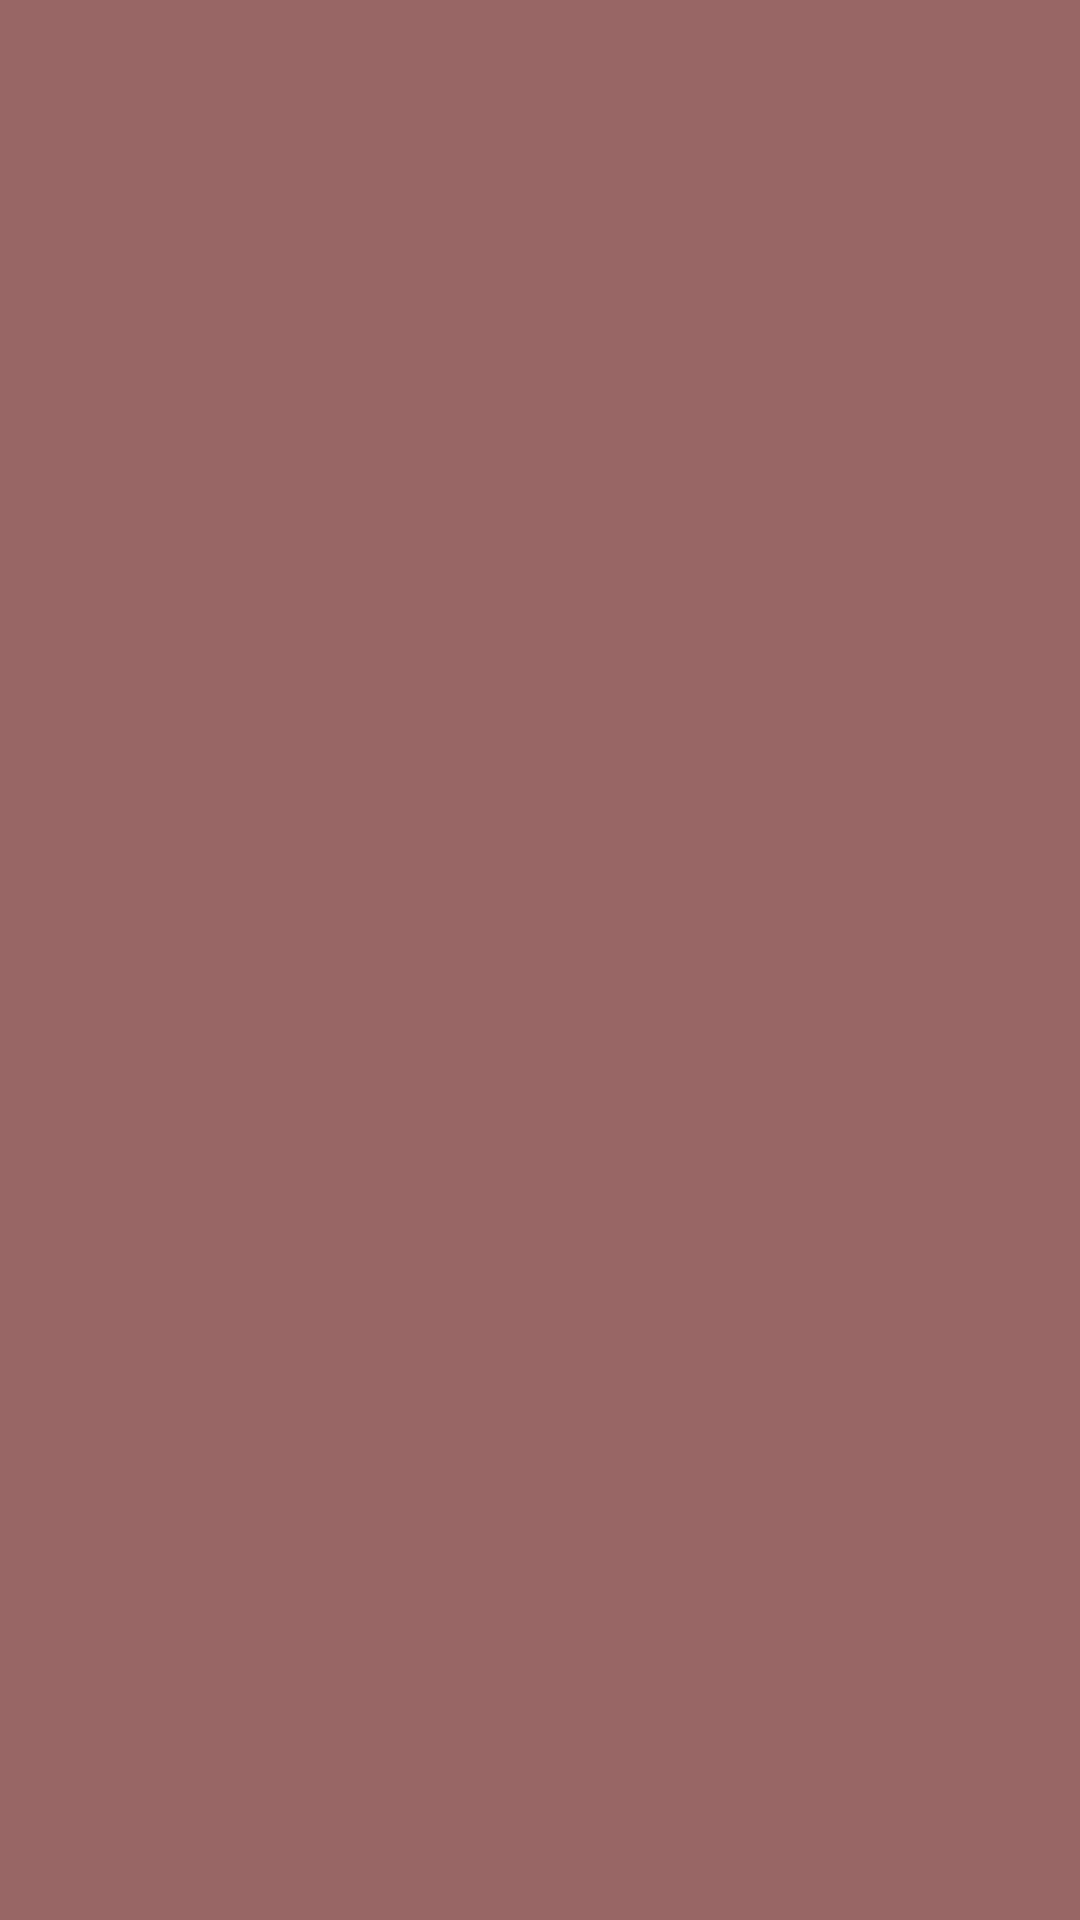 1080x1920 Copper Rose Solid Color Background